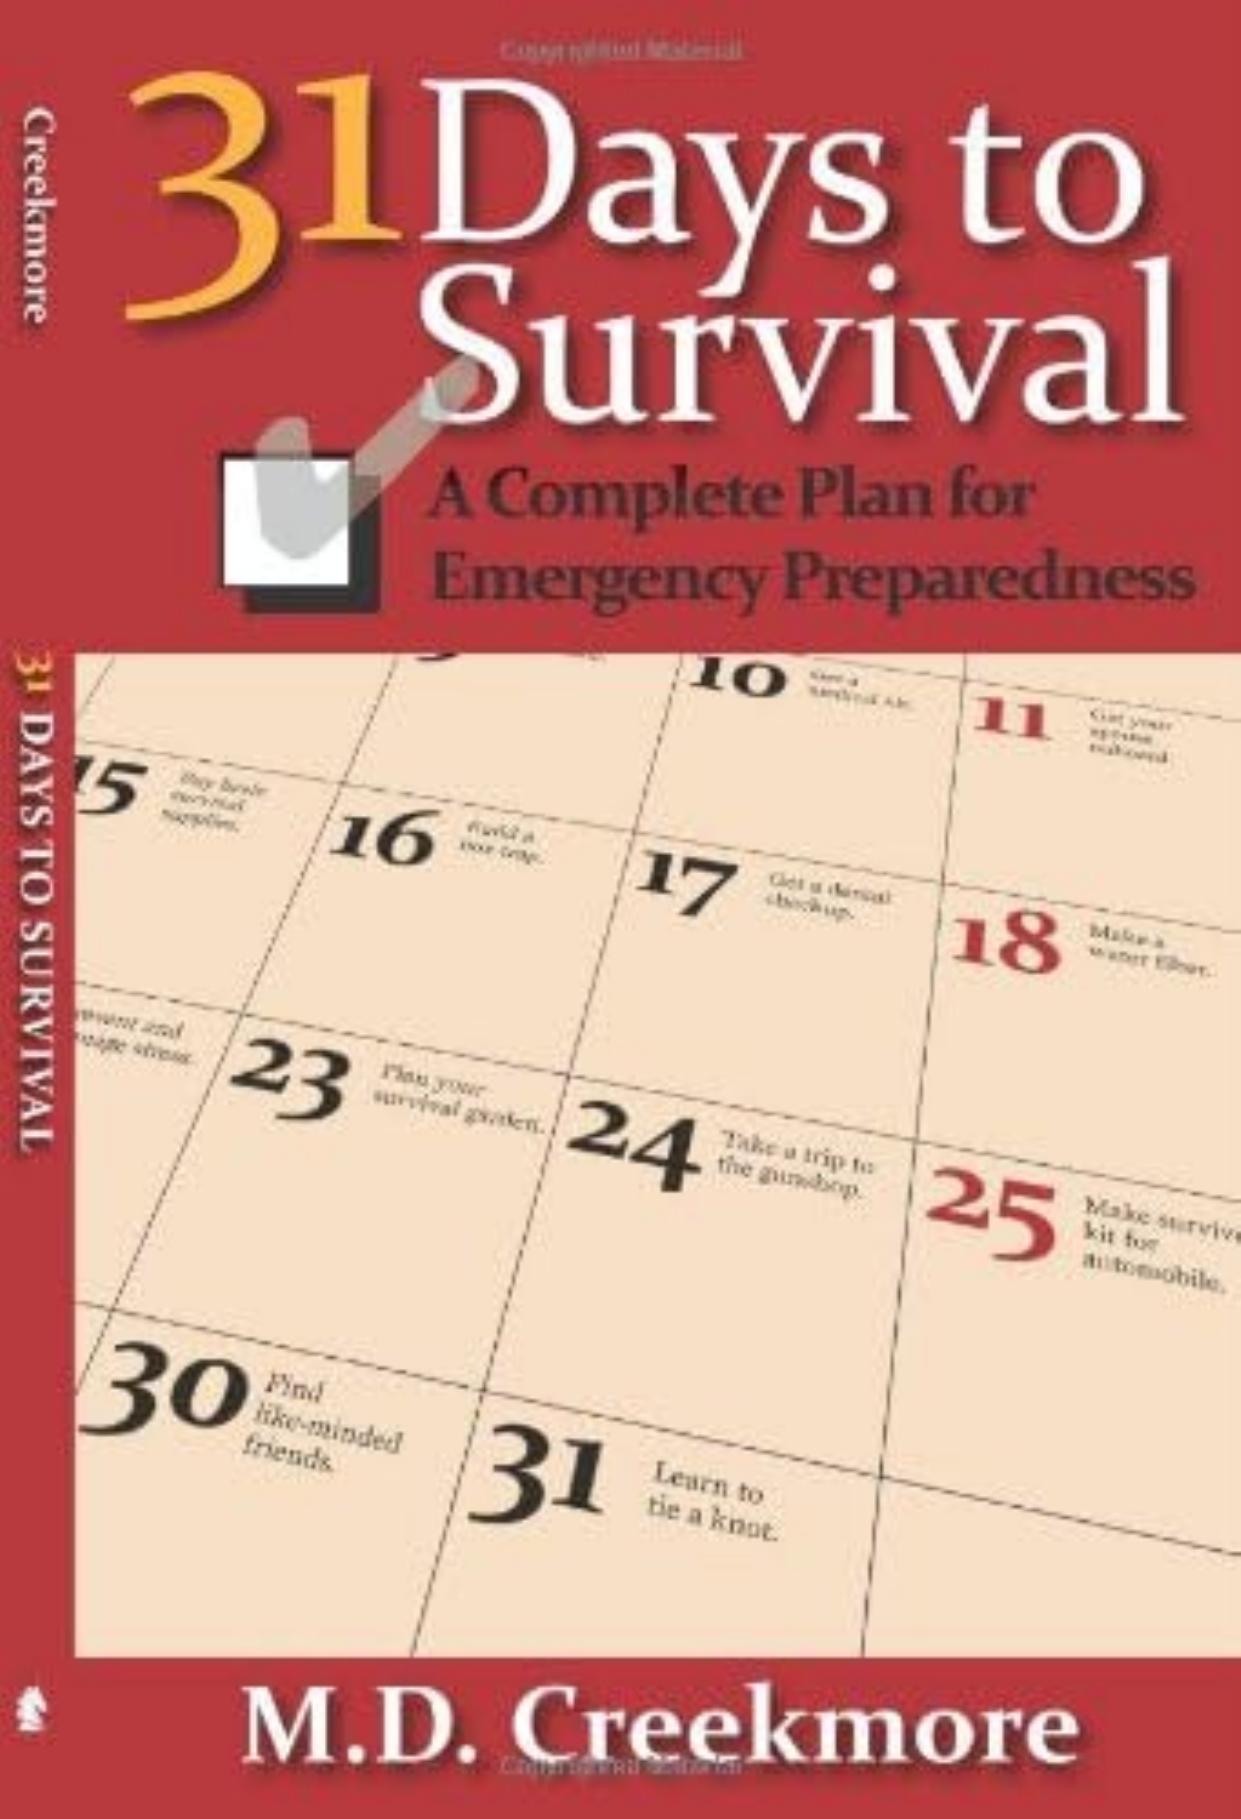 31 Days To Survival: A Complete Plan For Emergency Preparedness by M.D. Creekmore